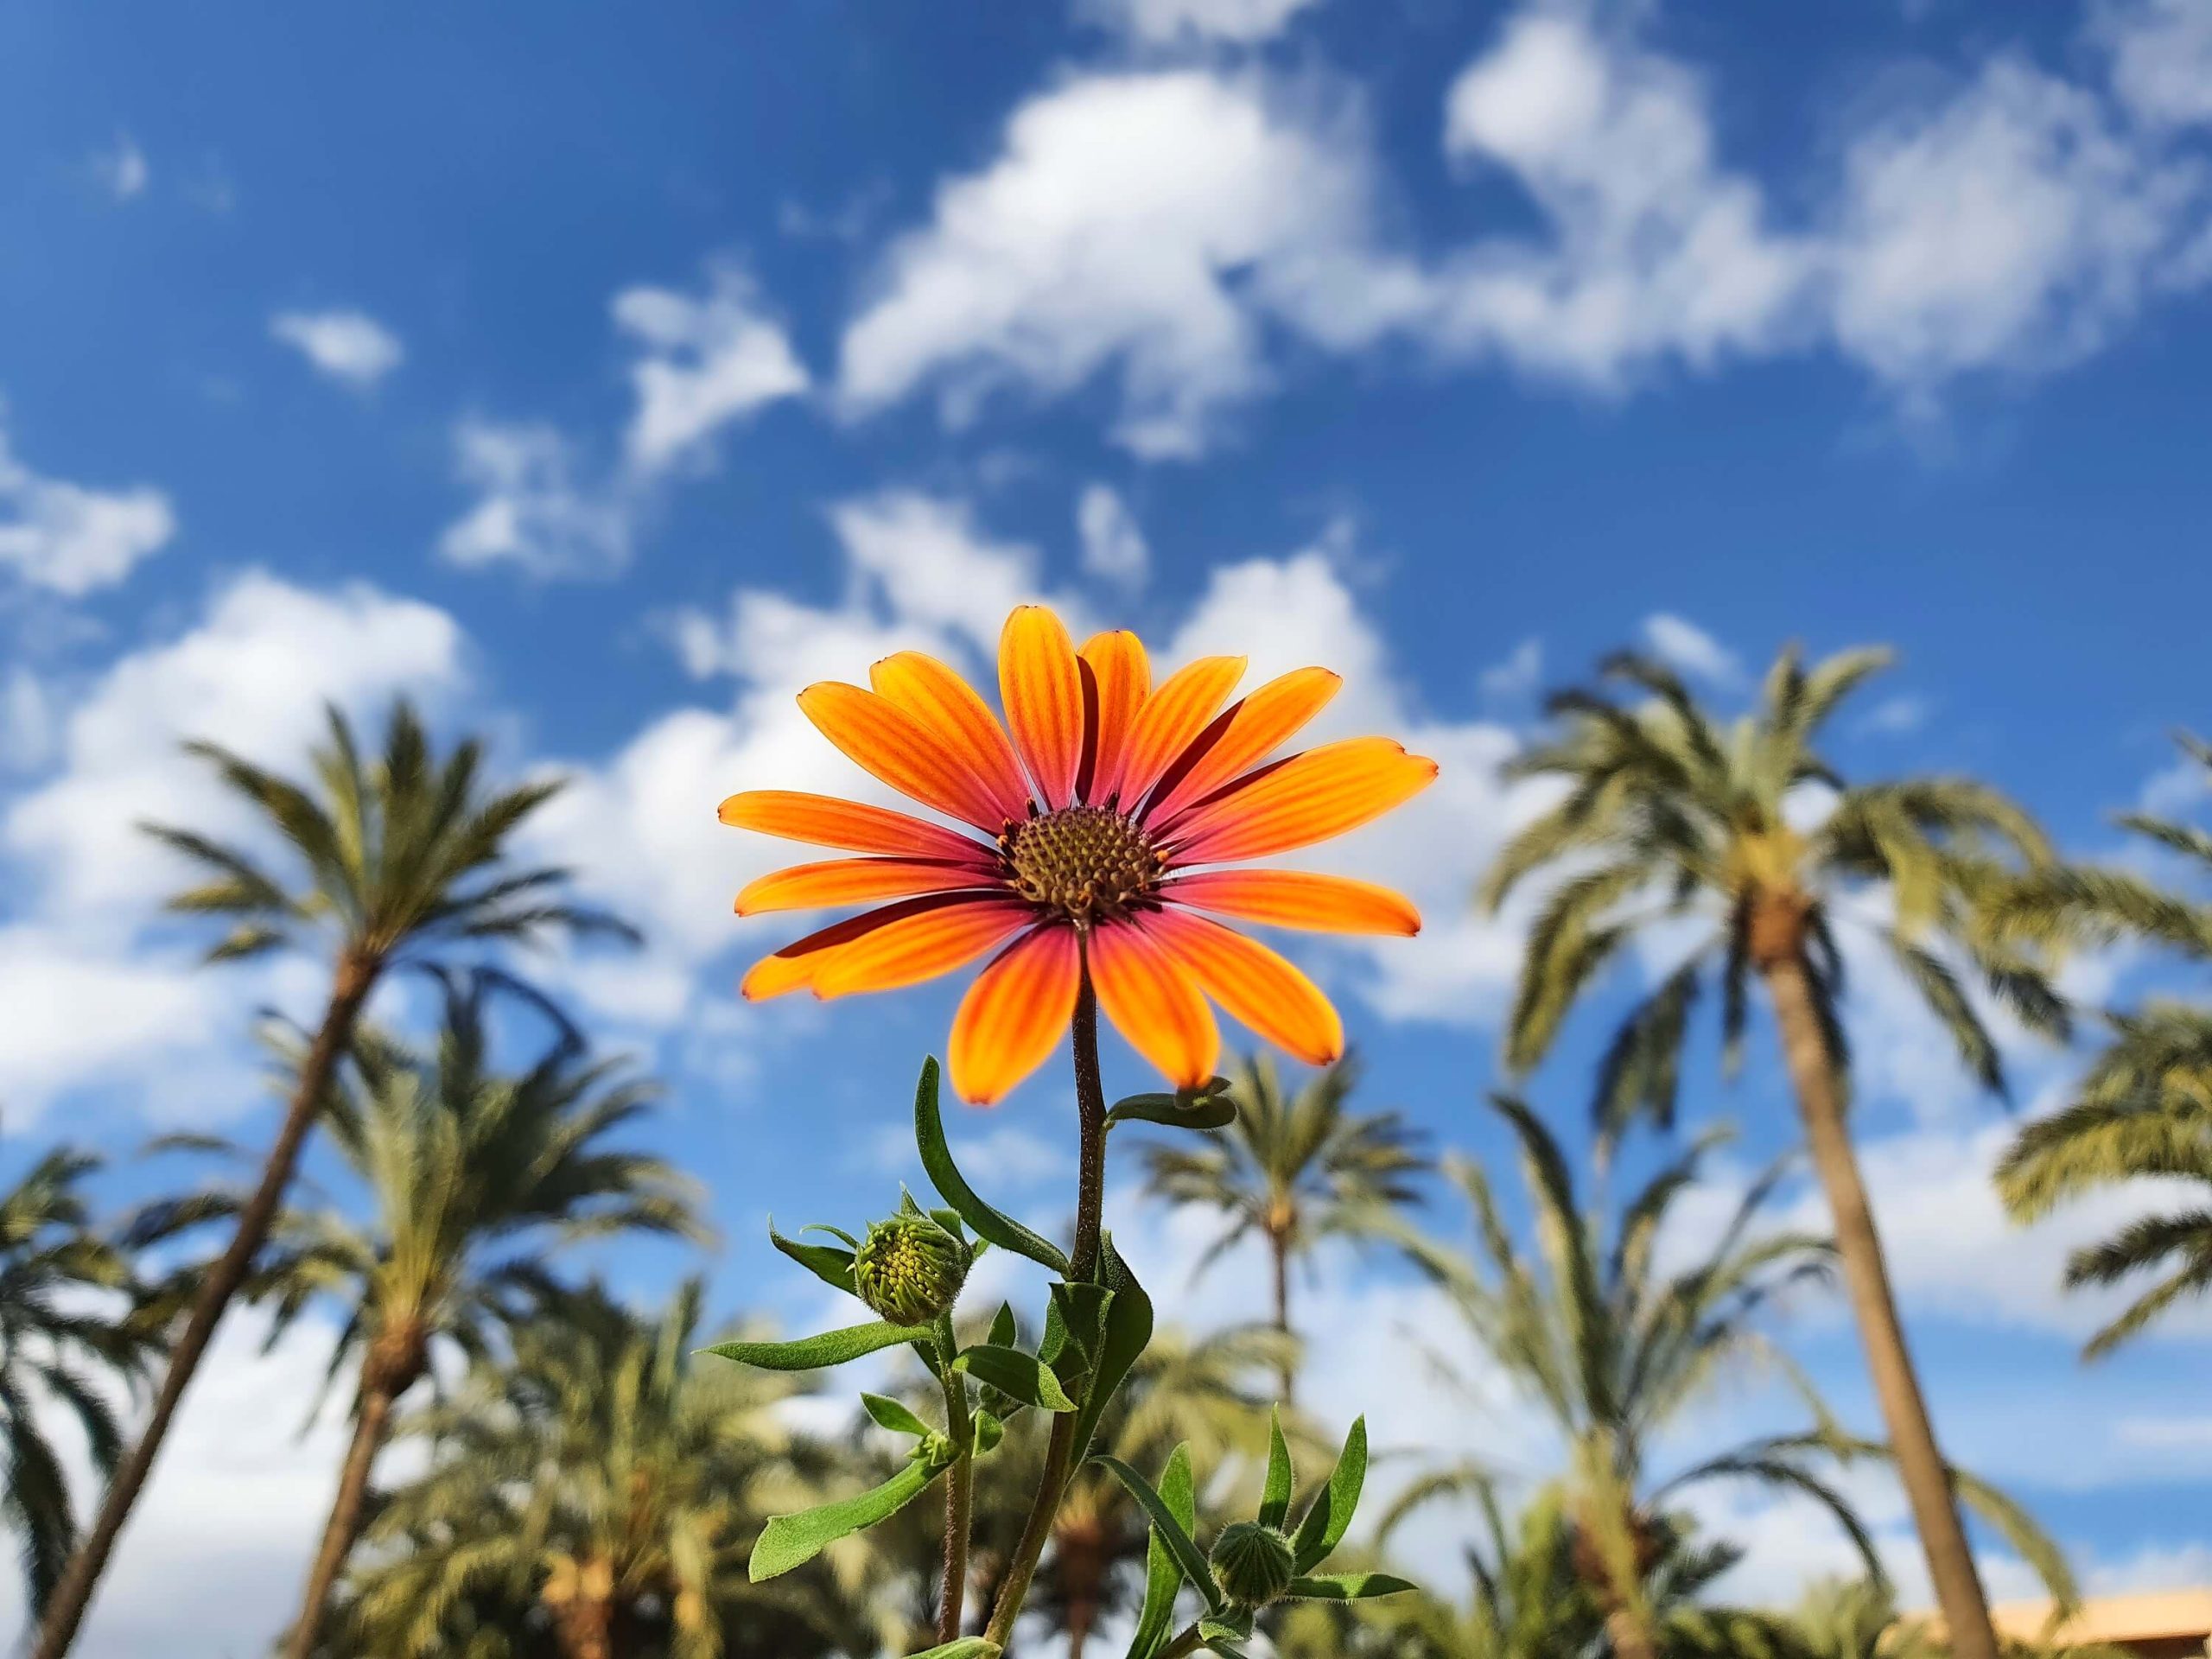 A closeup of a flower under the Florida sun. We can see palm trees in the background